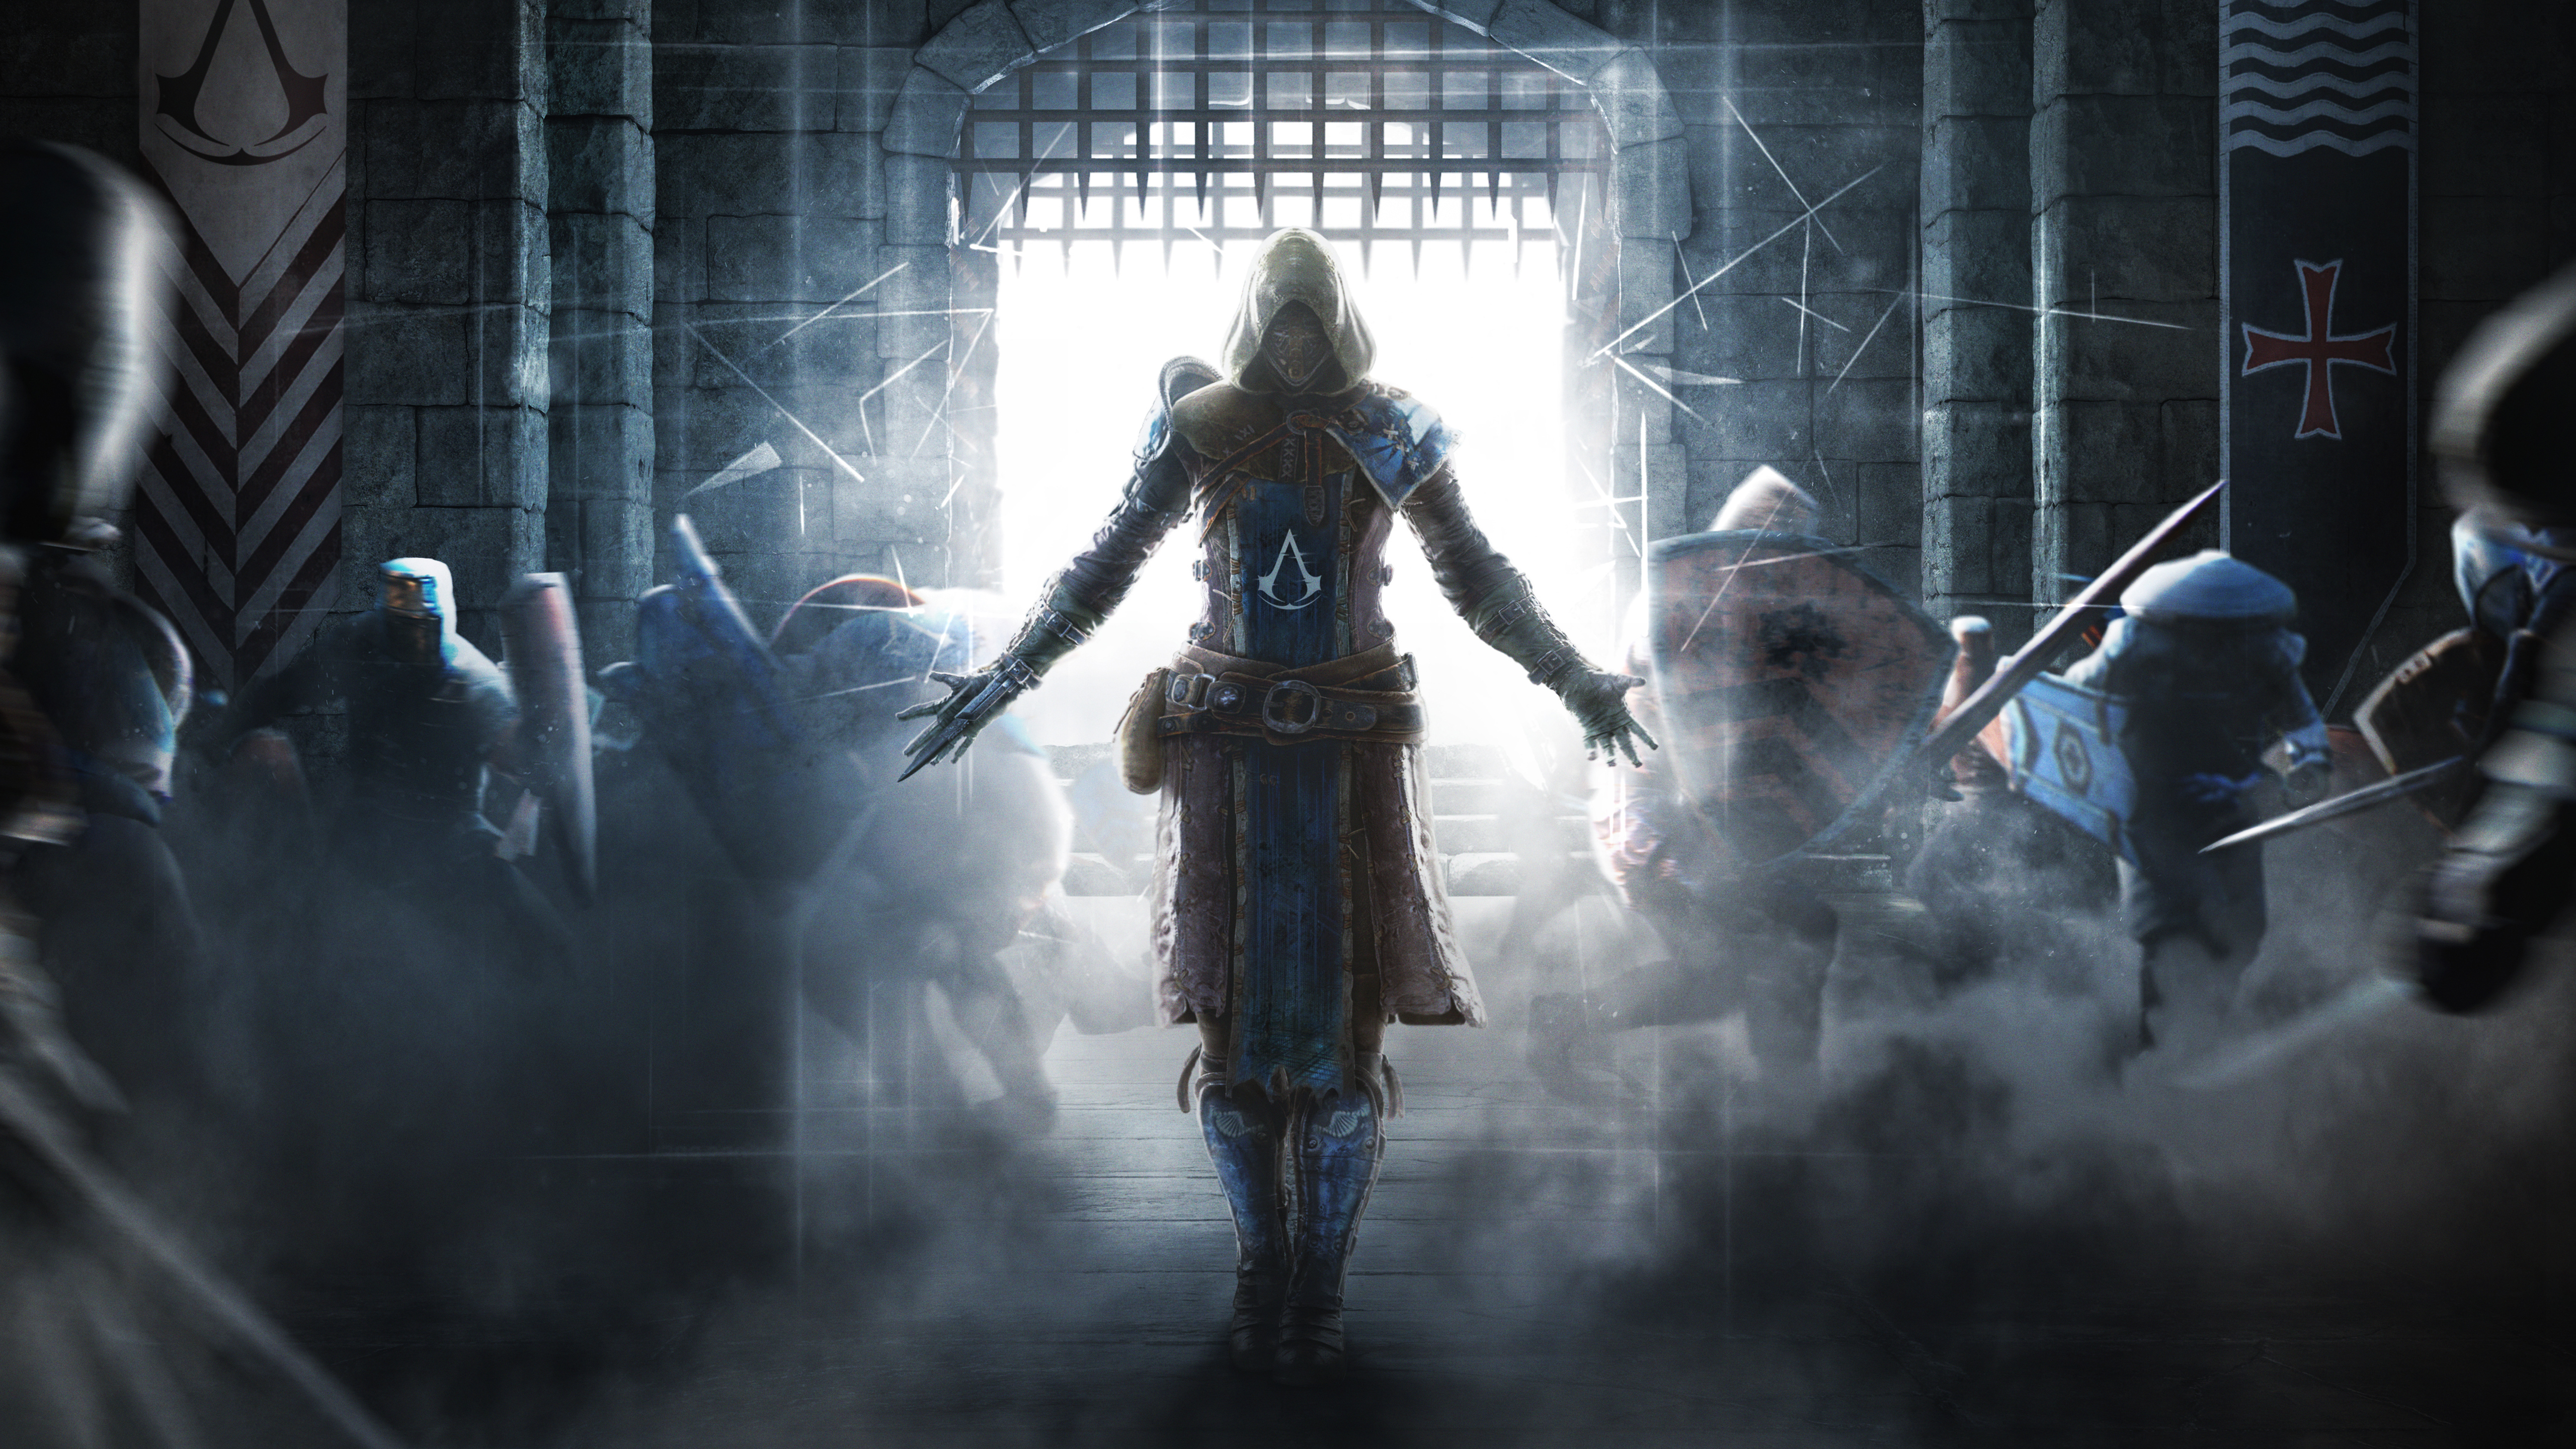 Wallpaper for Honor, Darkness, Digital Compositing, pc Game, Games,  Background - Download Free Image